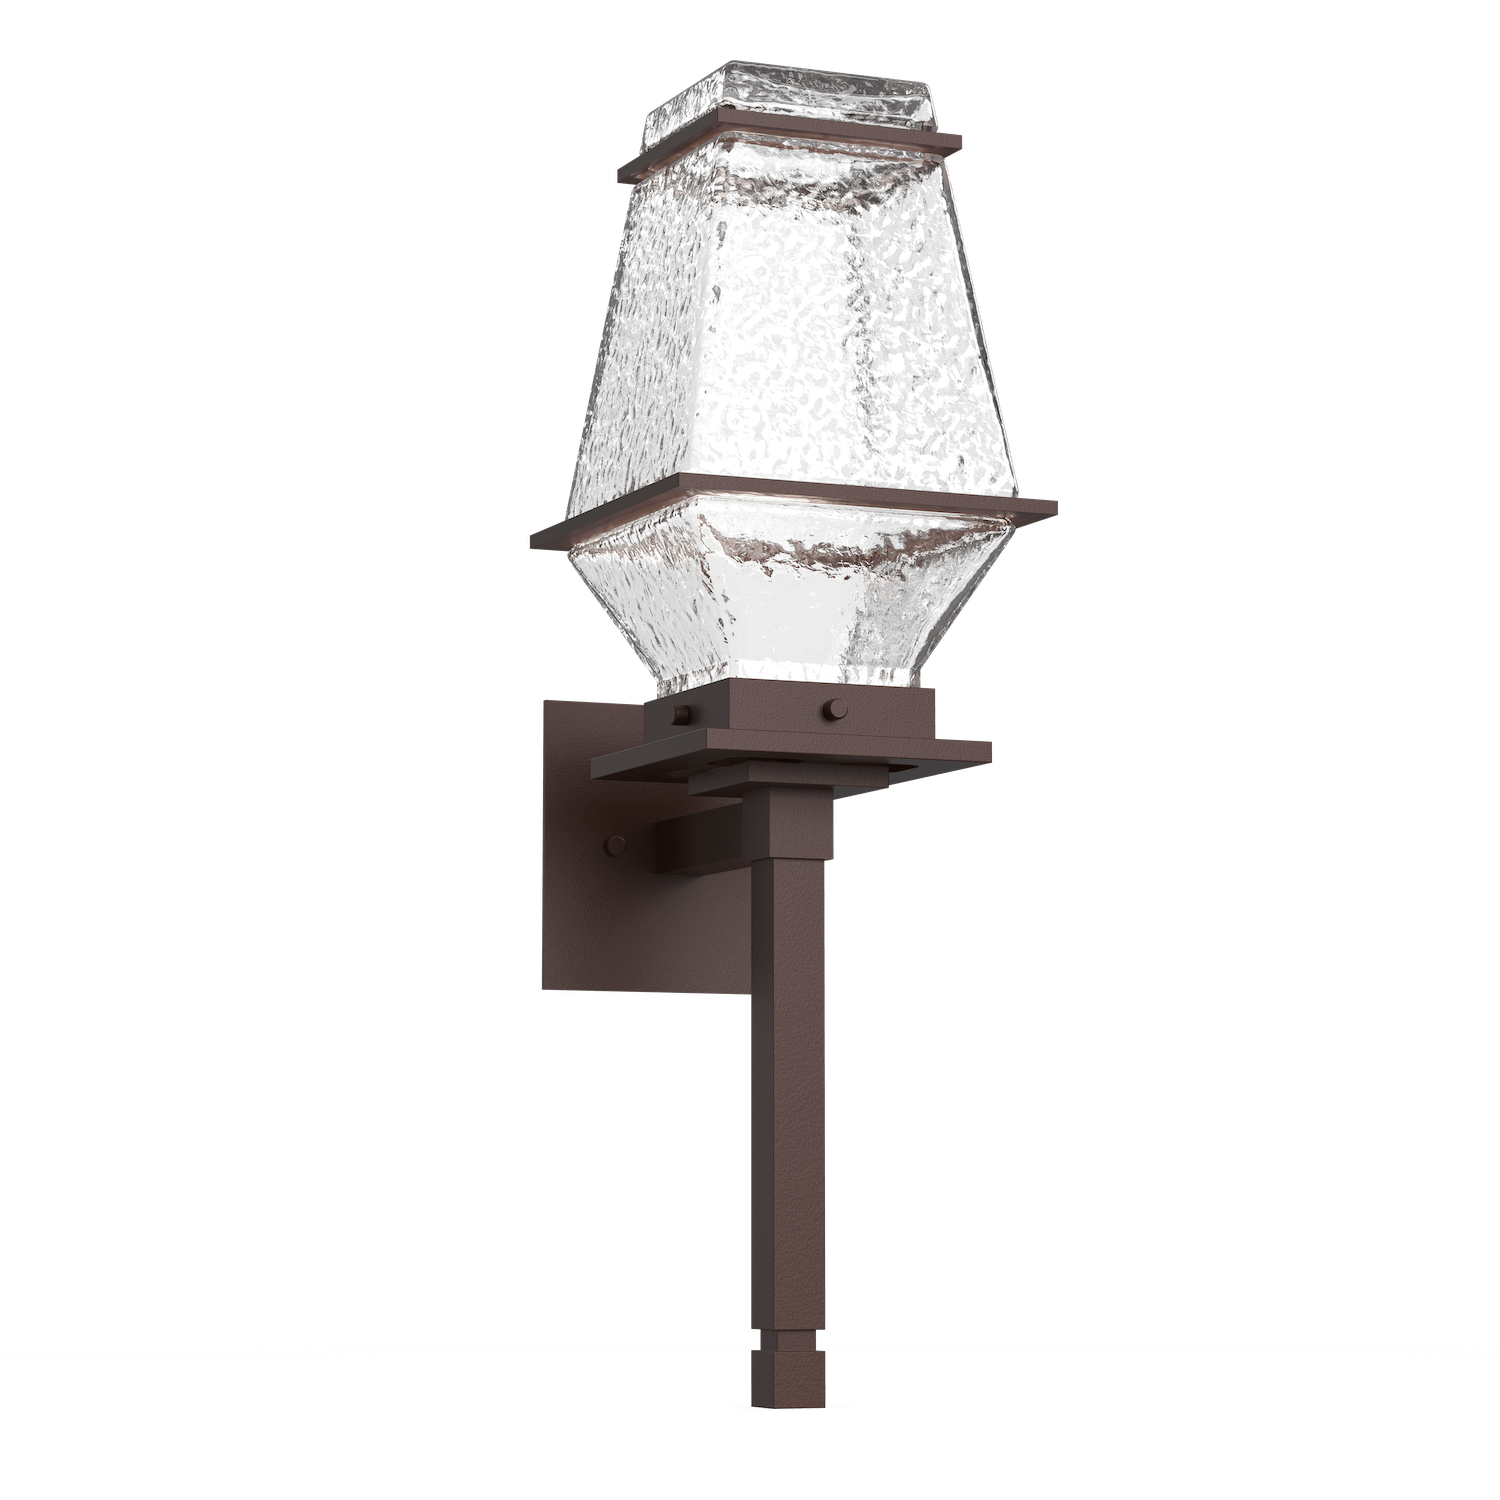 ODB0077-03-SB-C-Hammerton-Studio-Landmark-24-inch-outdoor-torch-sconce-with-statuary-bronze-finish-and-clear-blown-glass-shades-and-LED-lamping